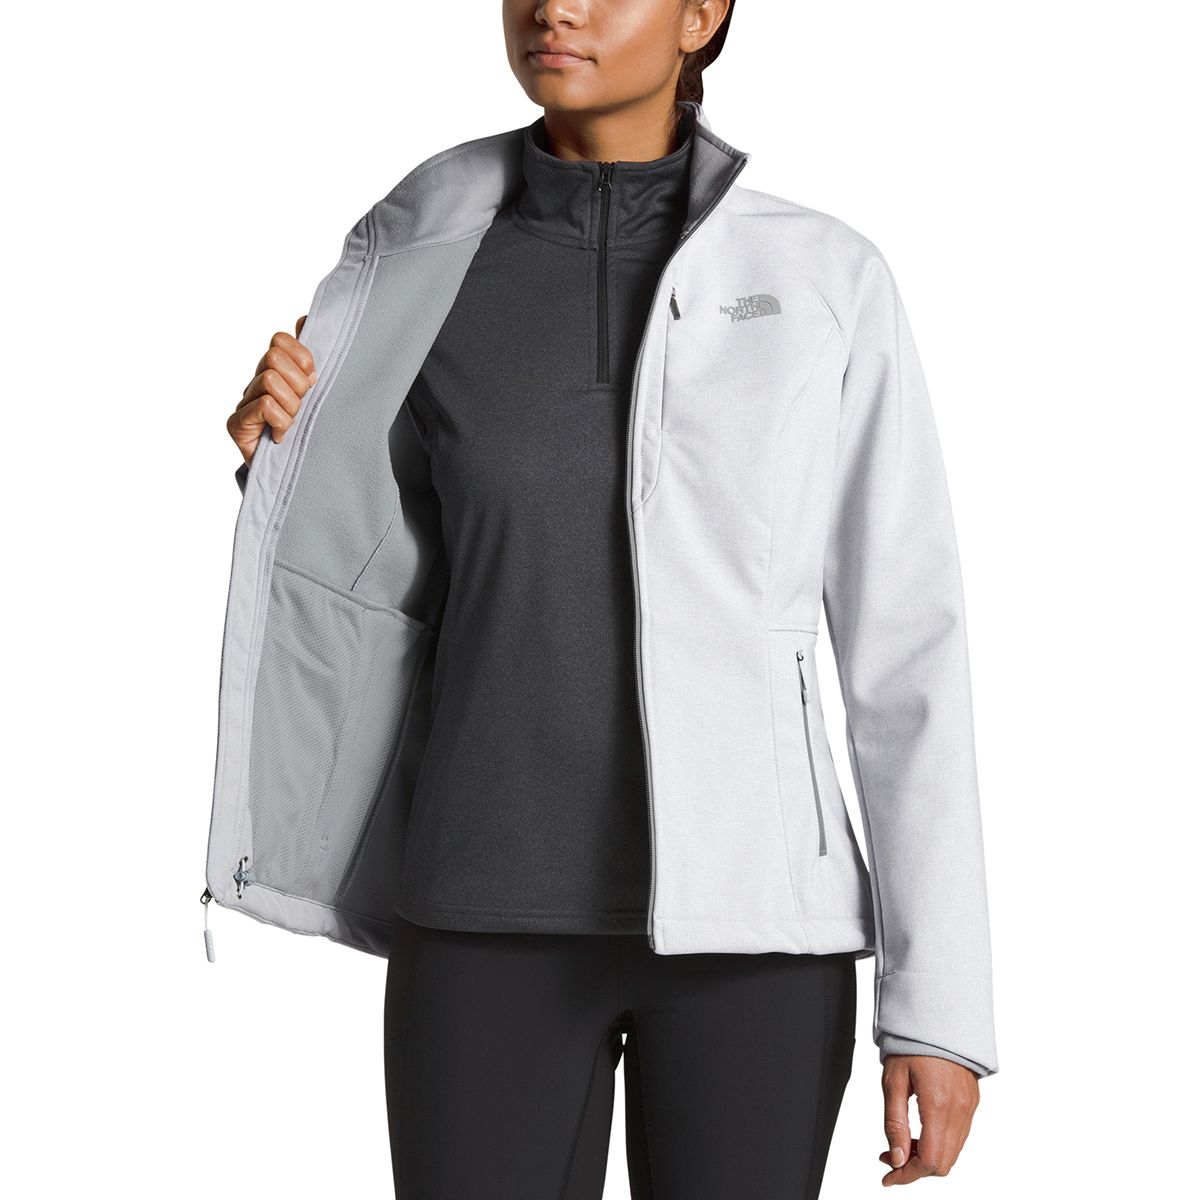 The North Face Apex Bionic 2 Softshell Jacket - Women's | Backcountry.com